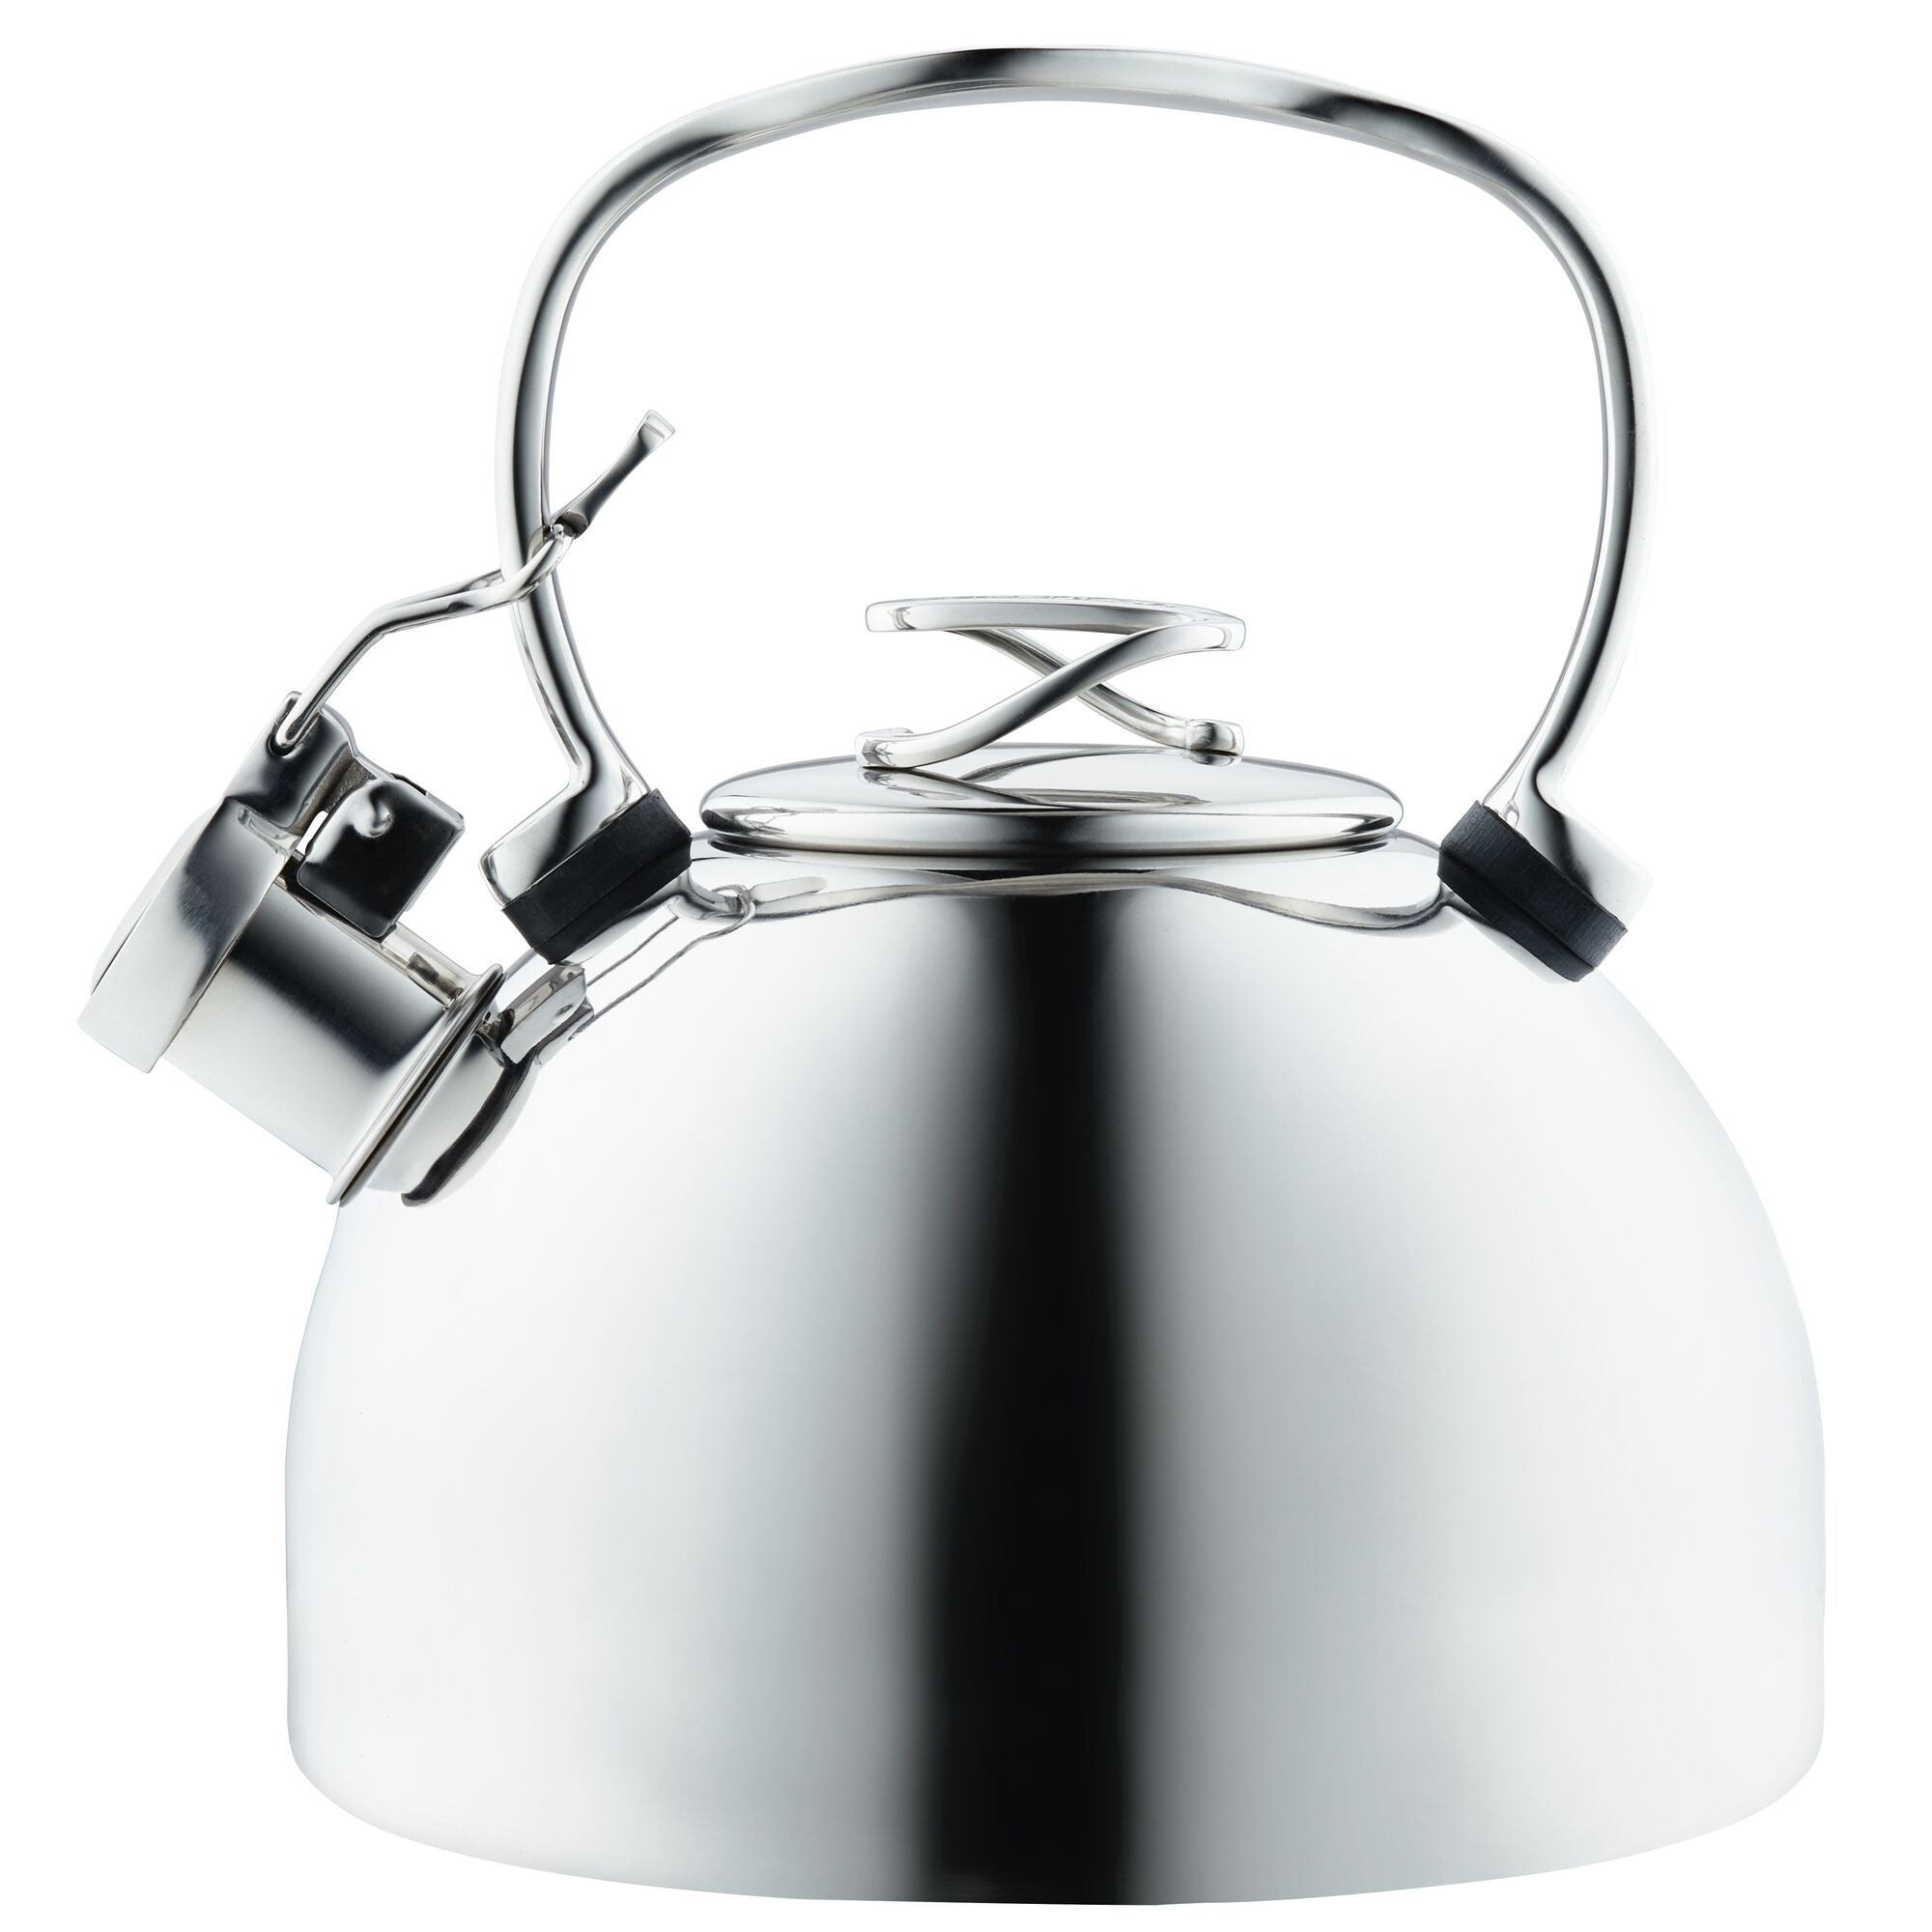 Redesigning The Classic Whistling Tea Kettle – Fellow